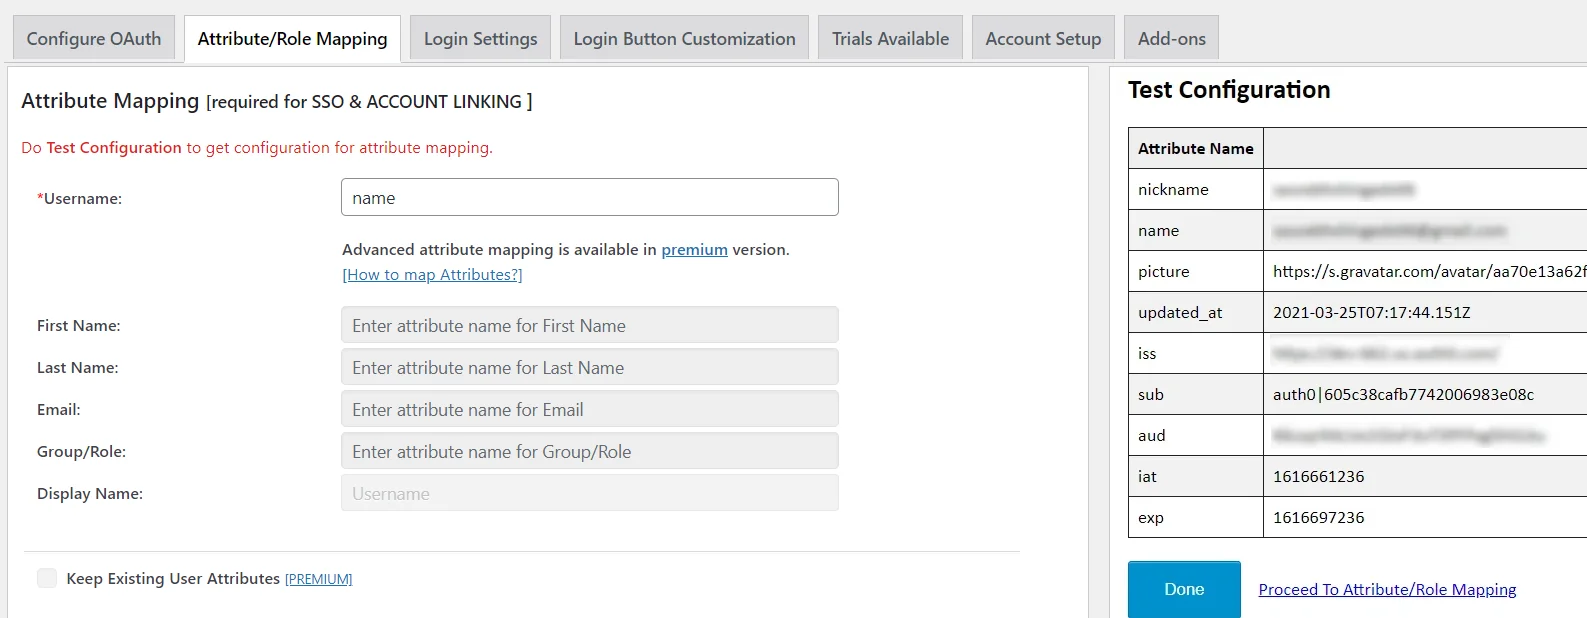 OAuth/OpenID Auth0 Single Sign On SSO WordPress create-newclient attribute/role mapping